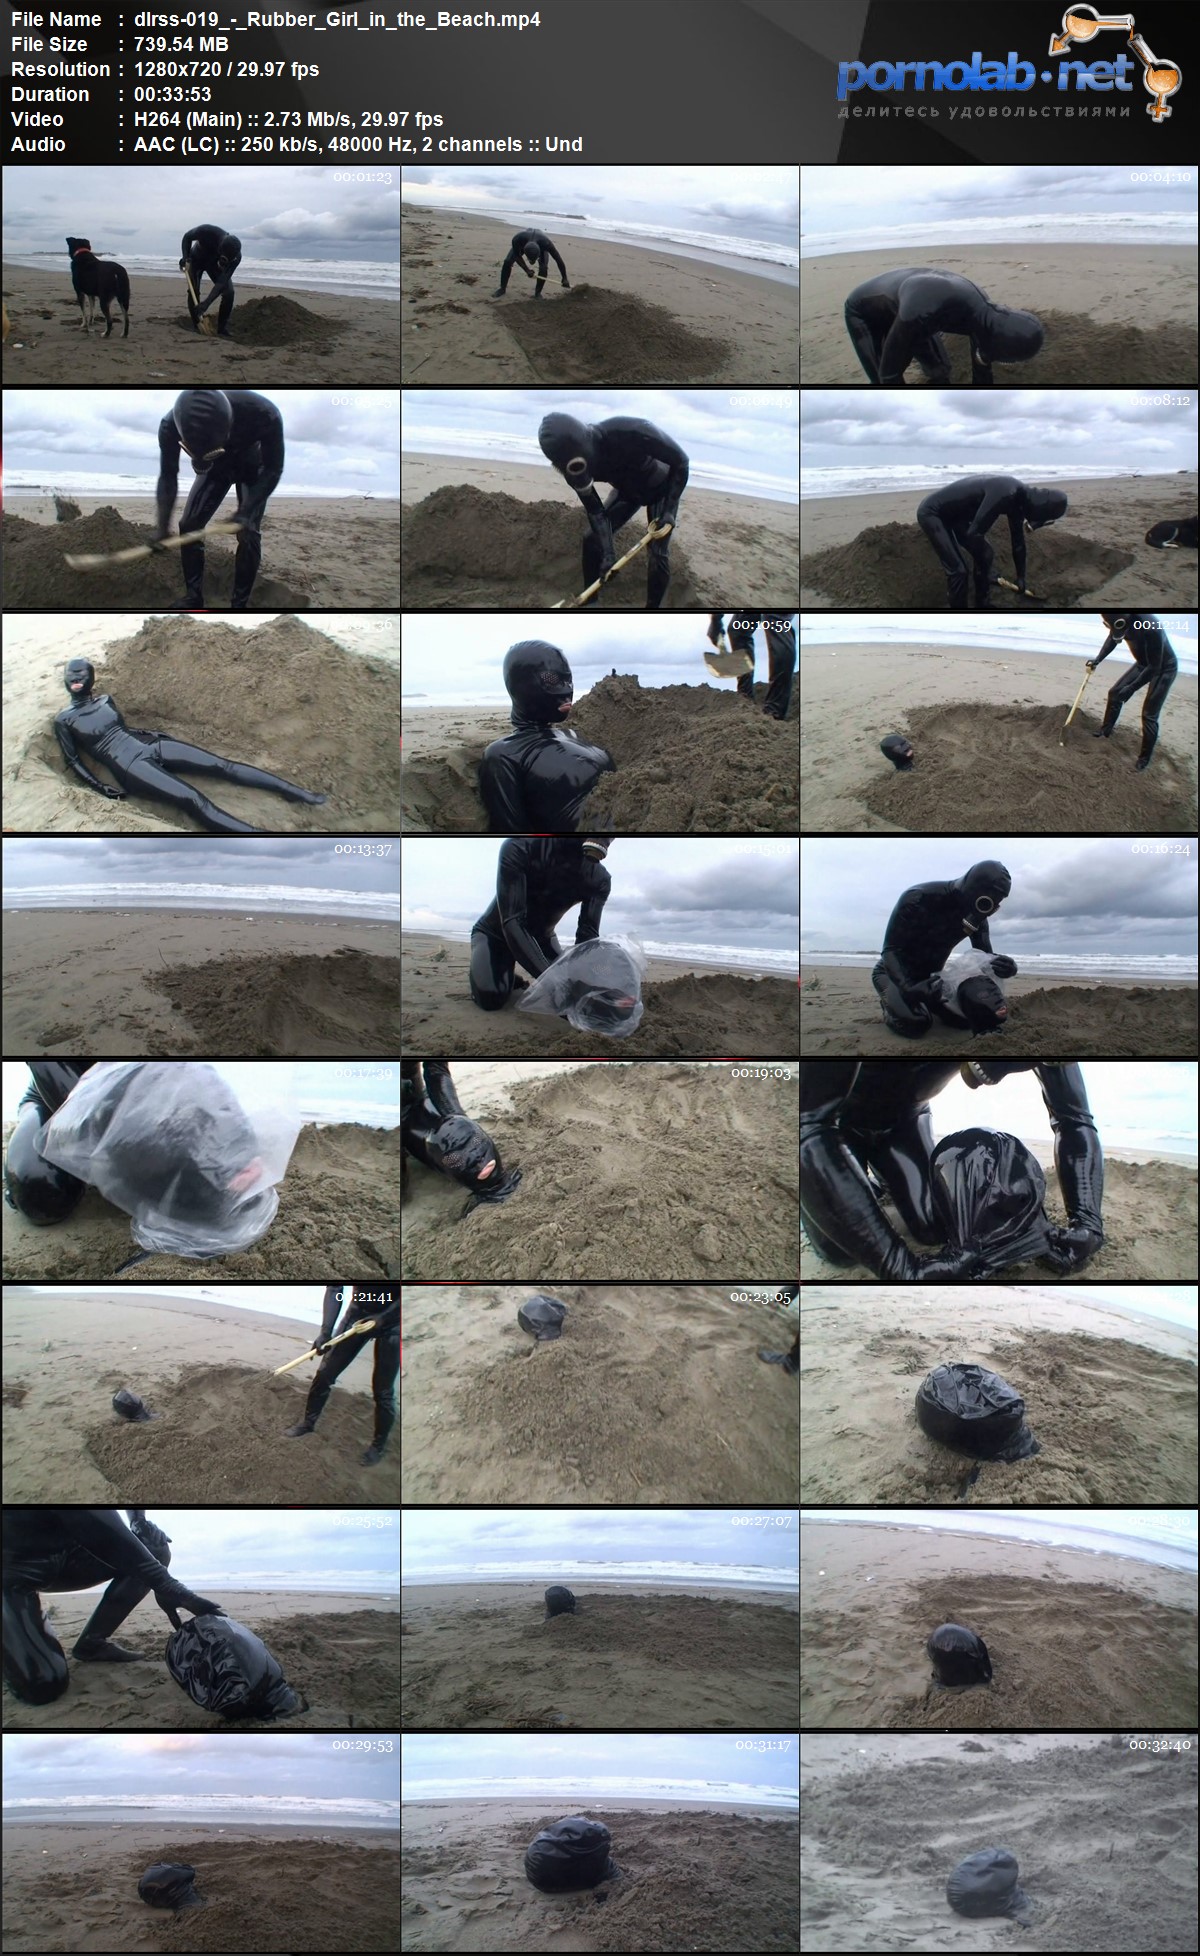 dlrss 019 Rubber Girl in the Beach mp 4